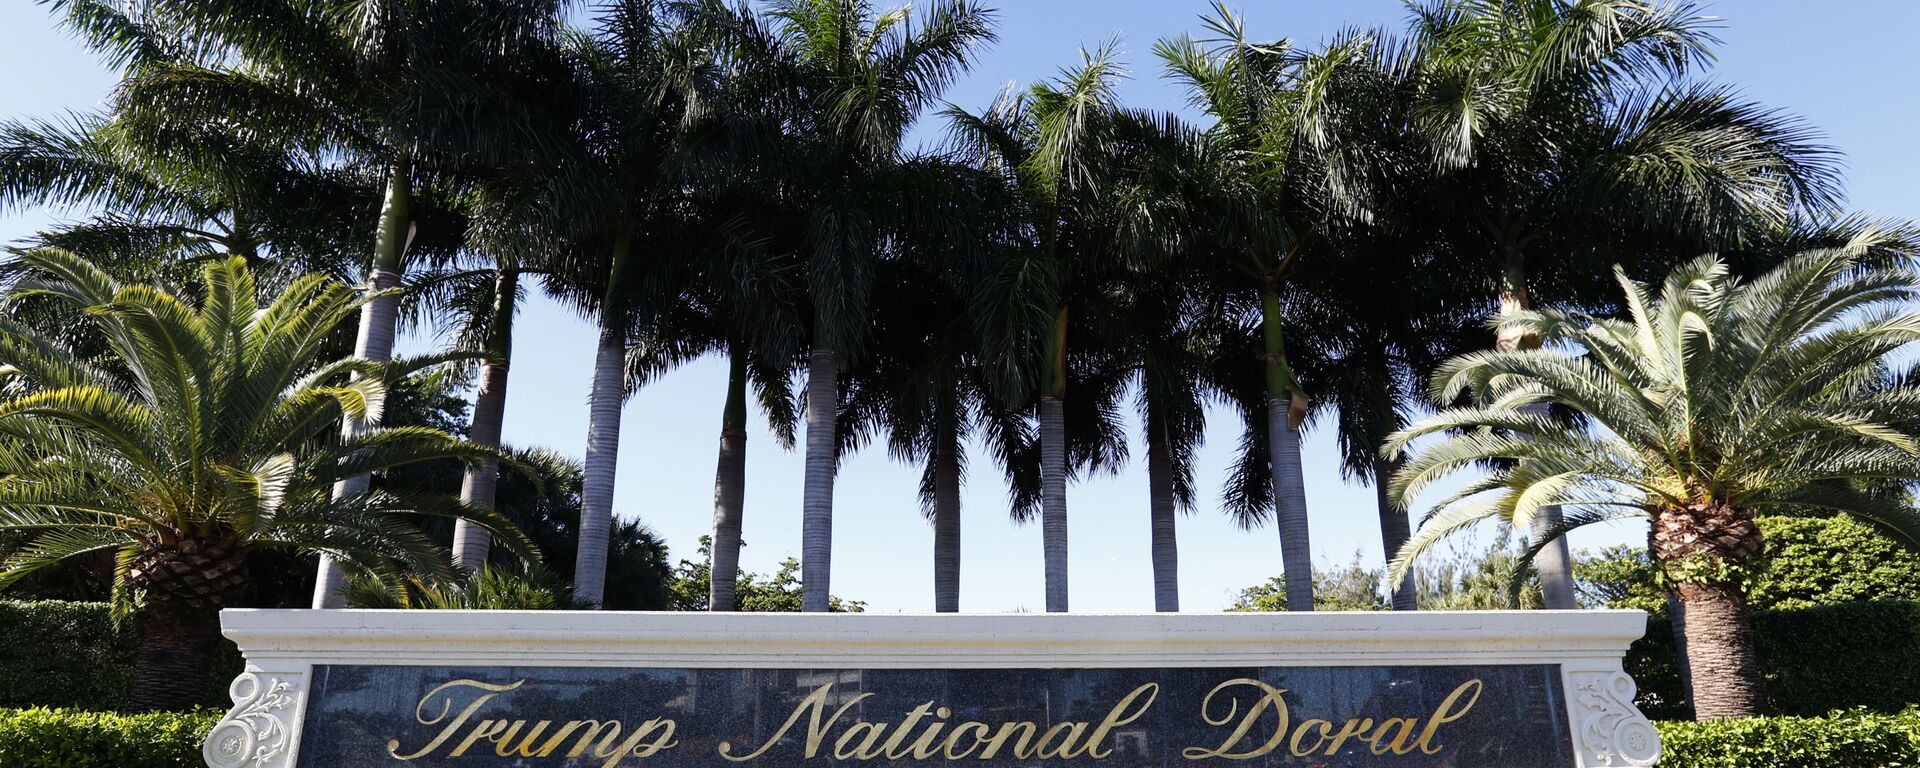 FILE - In this Nov. 20, 2019, file photo, palm trees line the entrance to Trump National Doral resort in Doral, Fla. Some furloughs at the Trump golf resort in South Florida are becoming permanent layoffs. A notice that the Trump National Doral Miami filed with the State of Florida last week says it is permanently laying off 250 workers out of 560 employees who were furloughed in March. The positions include cooks, housekeepers, servers, engineers, golf concierges and service attendants. - Sputnik International, 1920, 19.02.2022